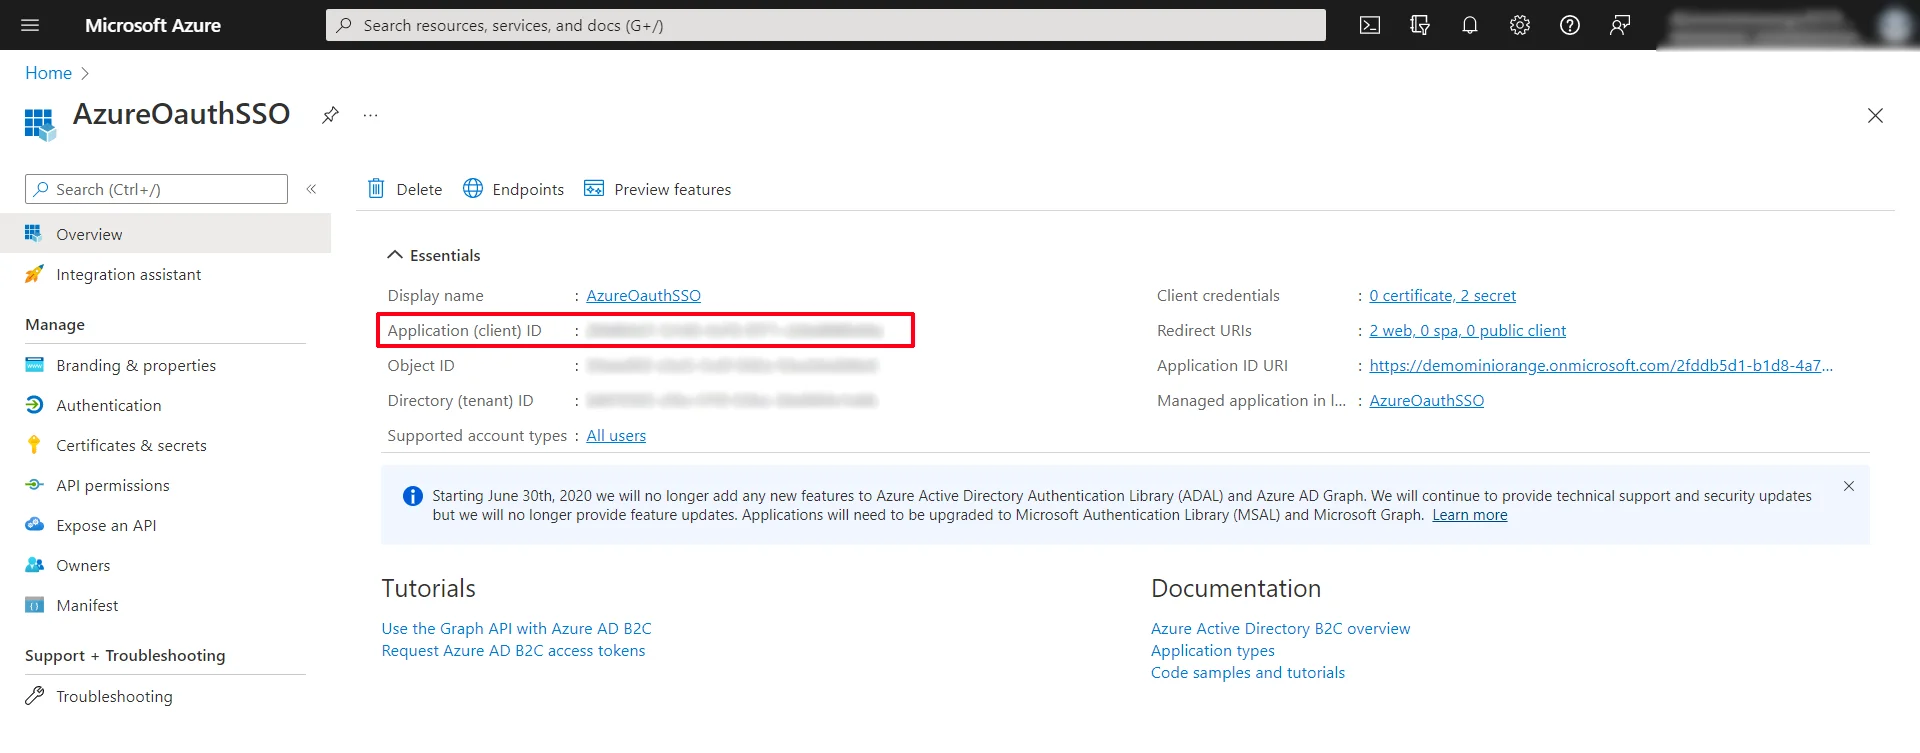 Azure AD oauth SSO shopify - application ID or client ID